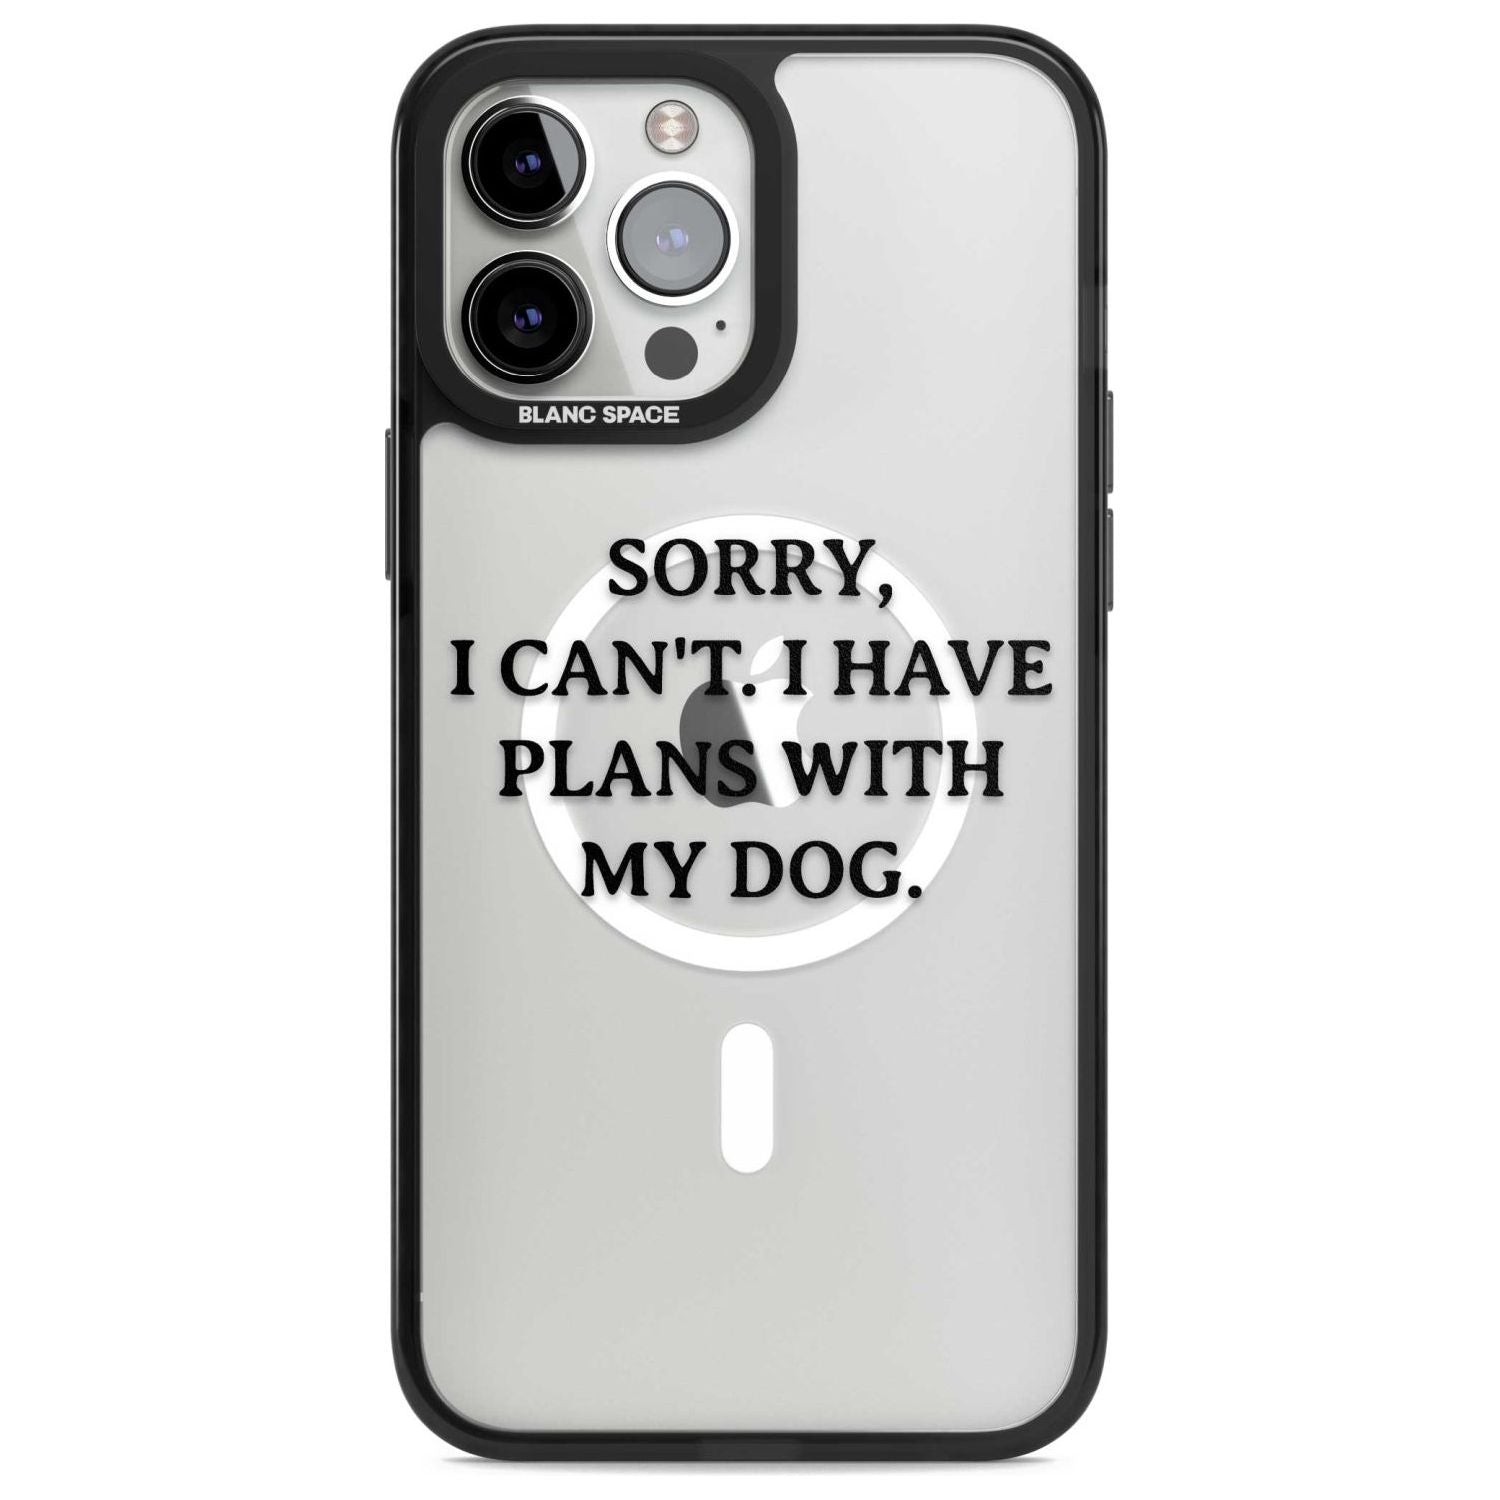 I Have Plans With My Dog Phone Case iPhone 13 Pro Max / Magsafe Black Impact Case Blanc Space